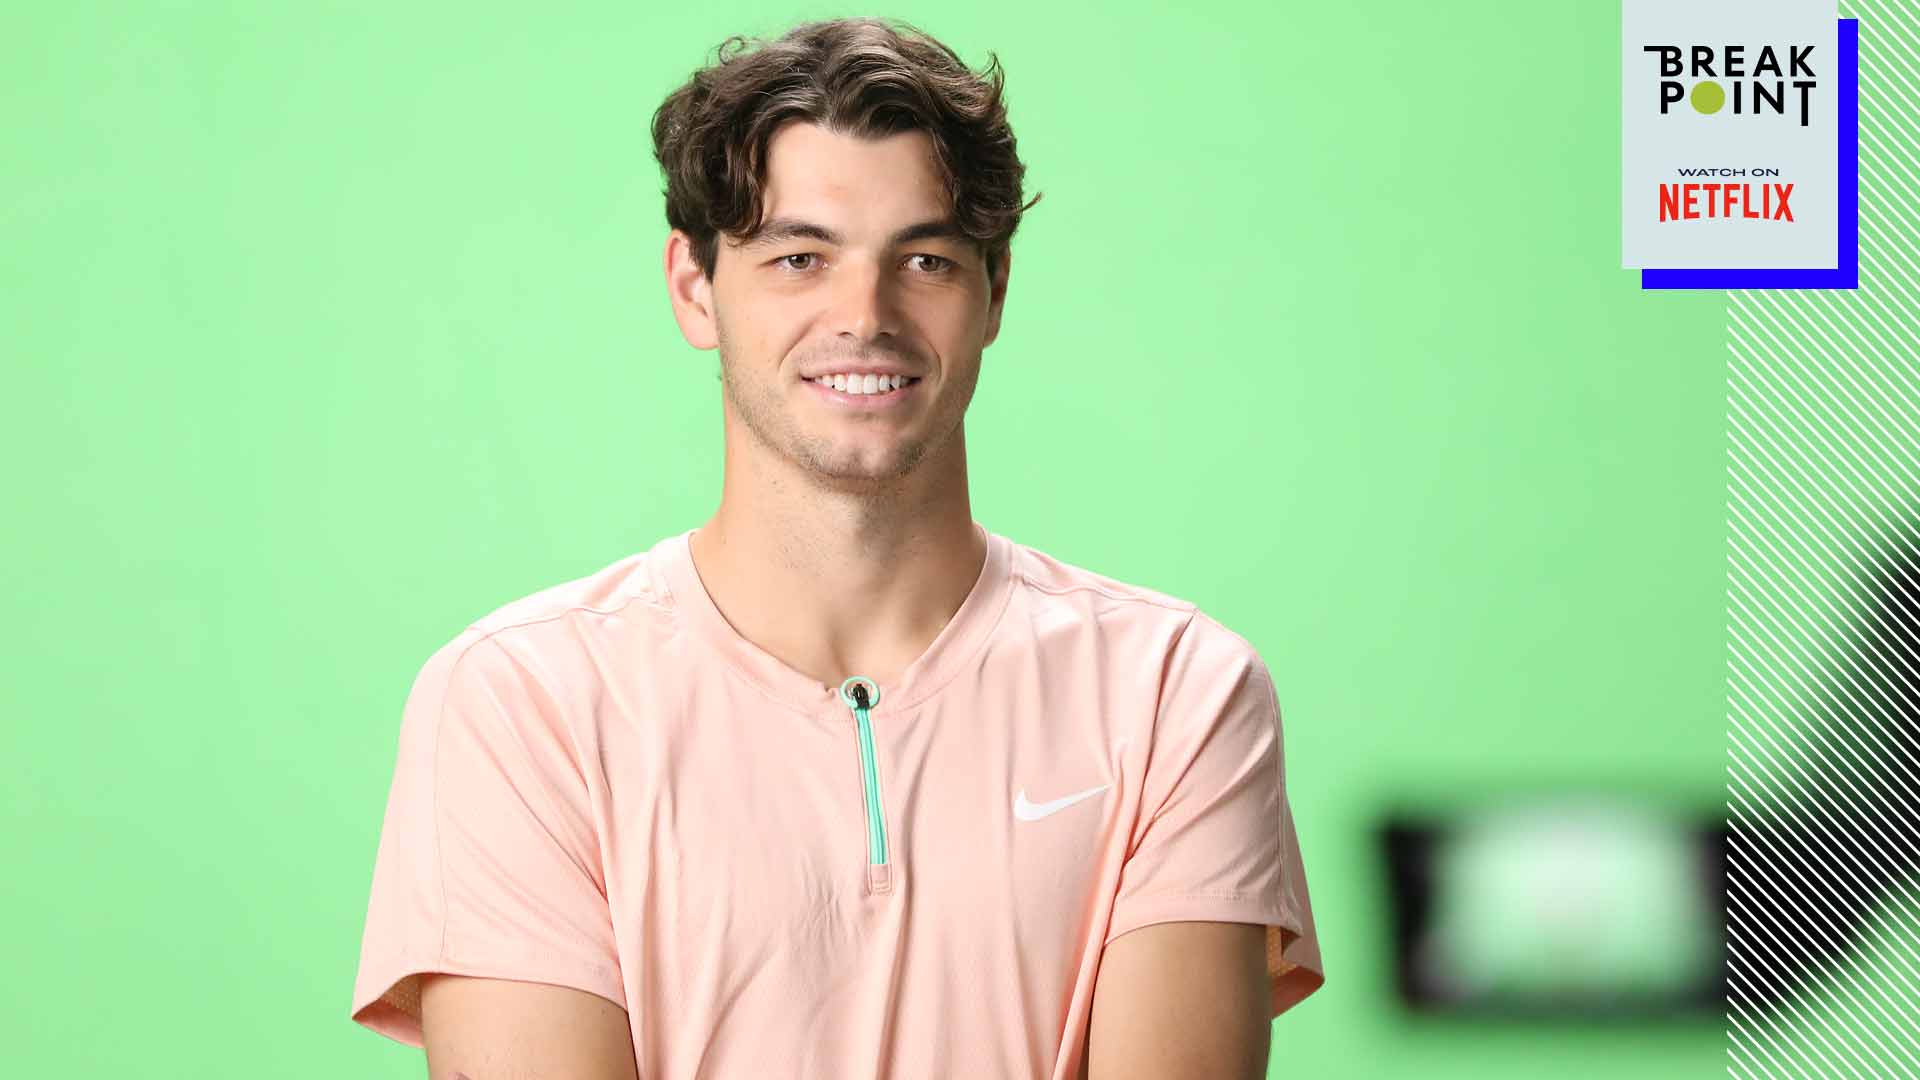 Taylor Fritz's efforts at the 2022 Nitto ATP Finals are highlighted in the final episode of Season 1 of Break Point.